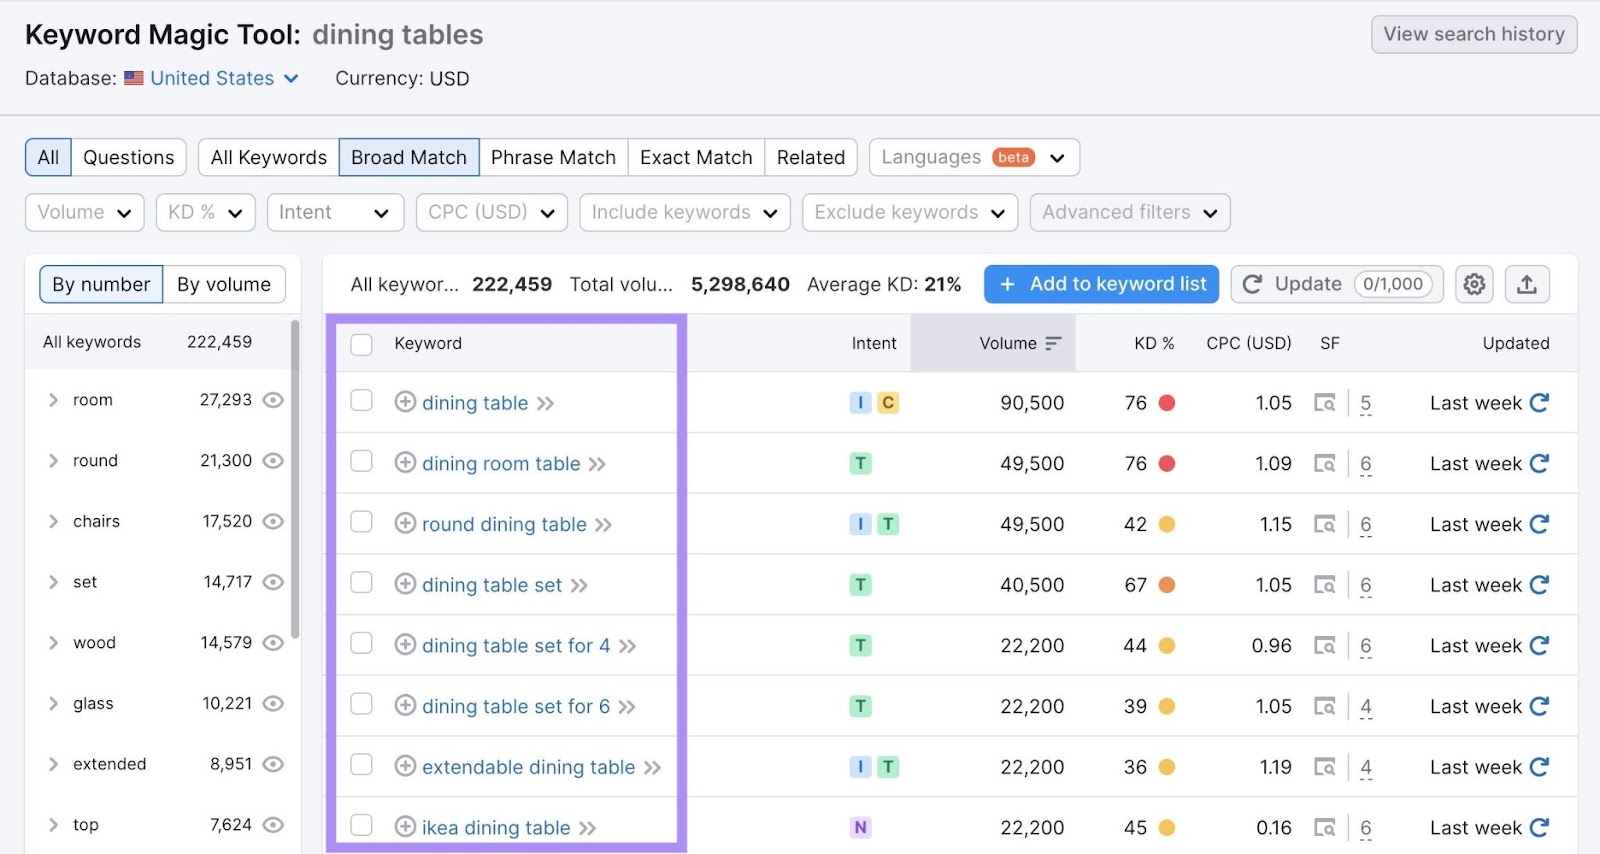 Keyword Magic Tool results for "dining table"